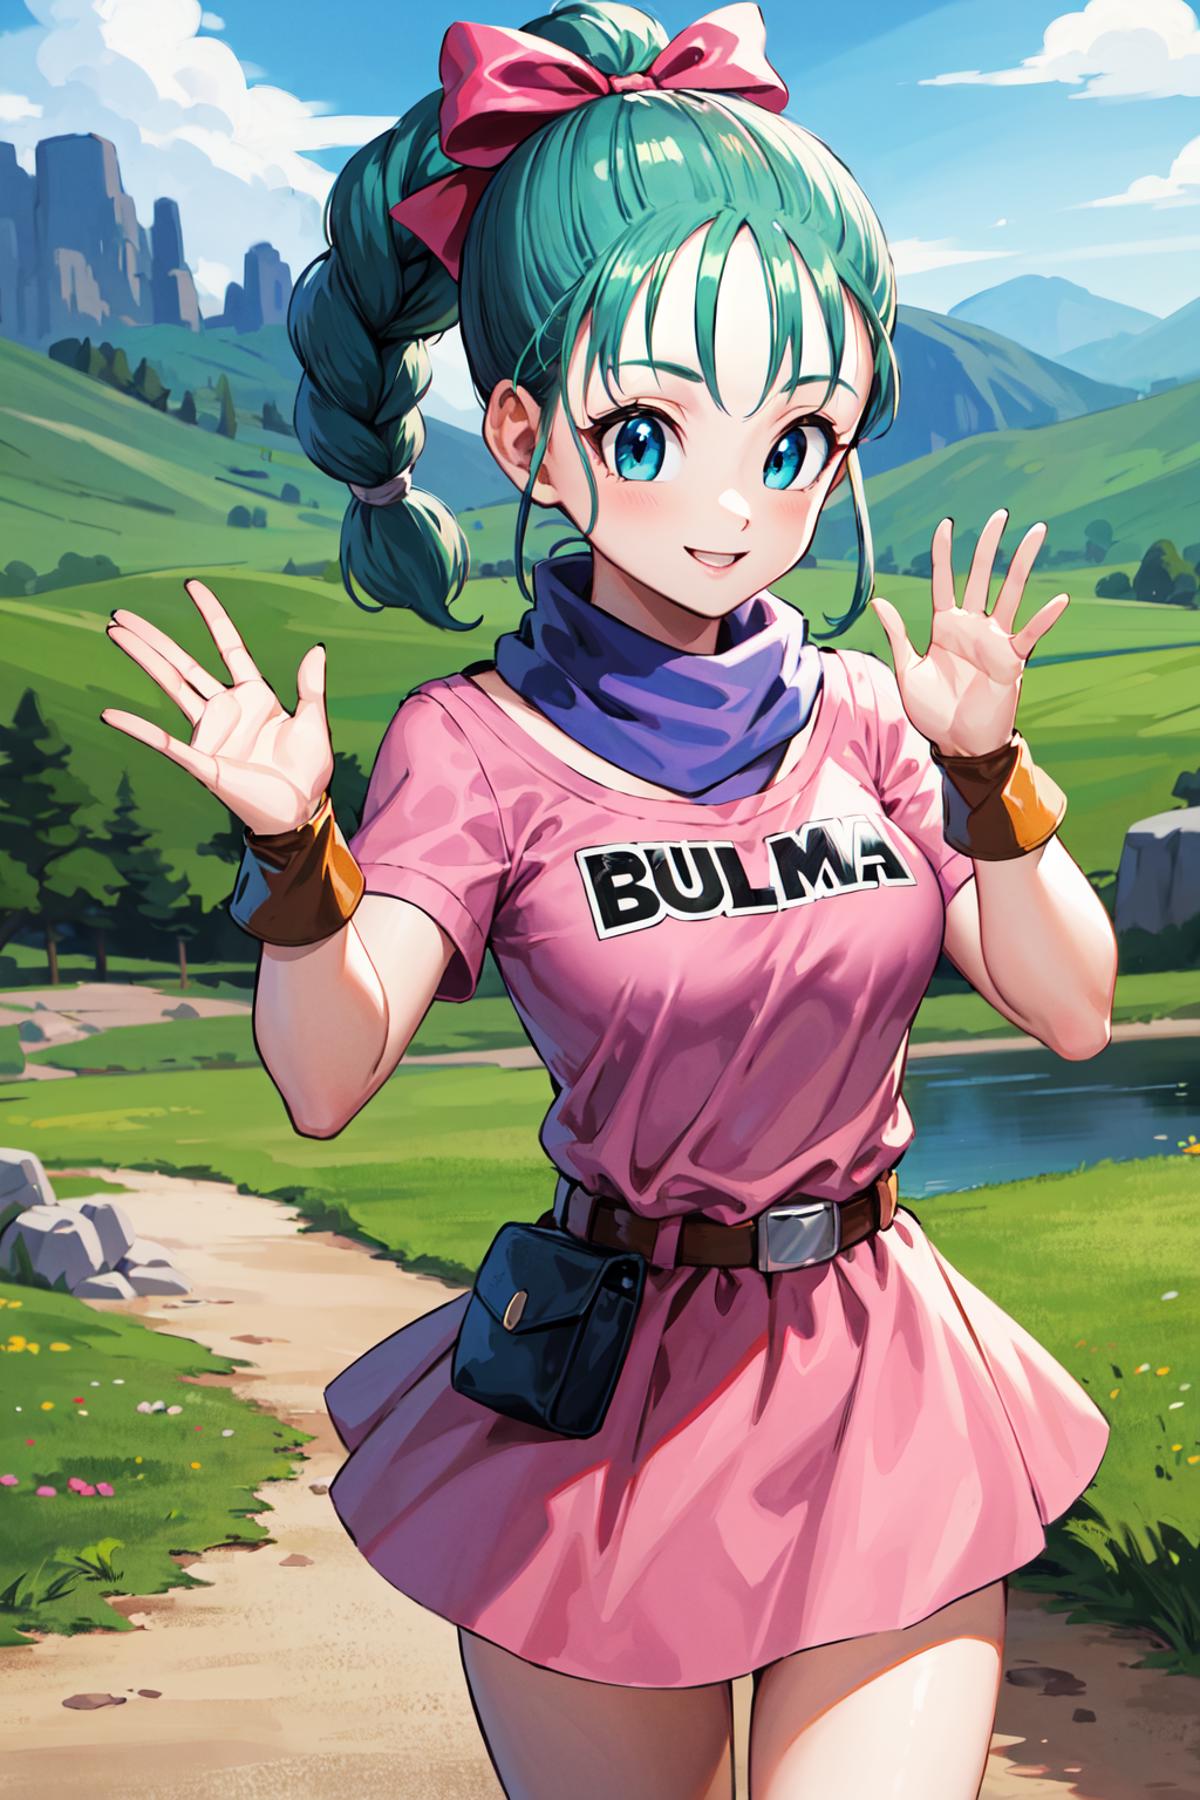 A cartoon character wearing a pink shirt with the word "Bulma" on it, waving her hands and holding a purse.